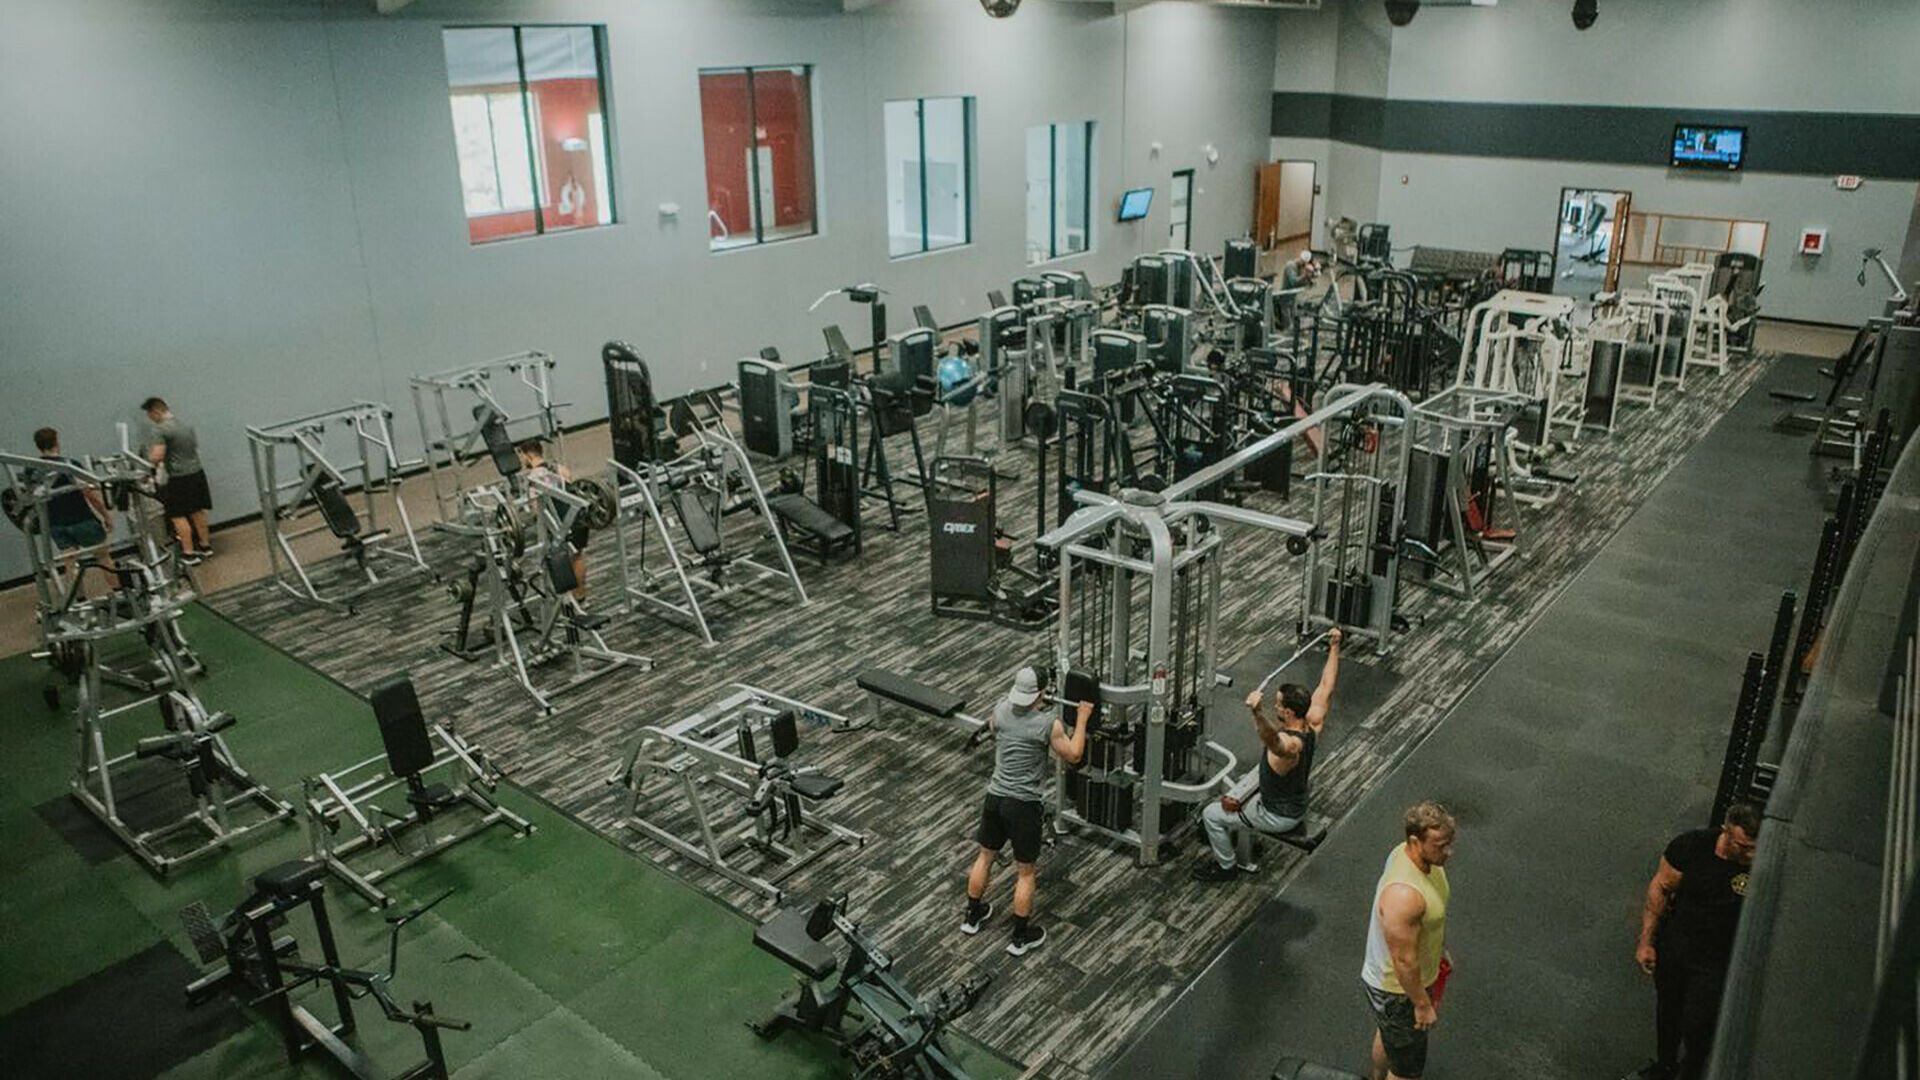 Gold's Gym returns to Houston with new look drawing on iconic gym's history